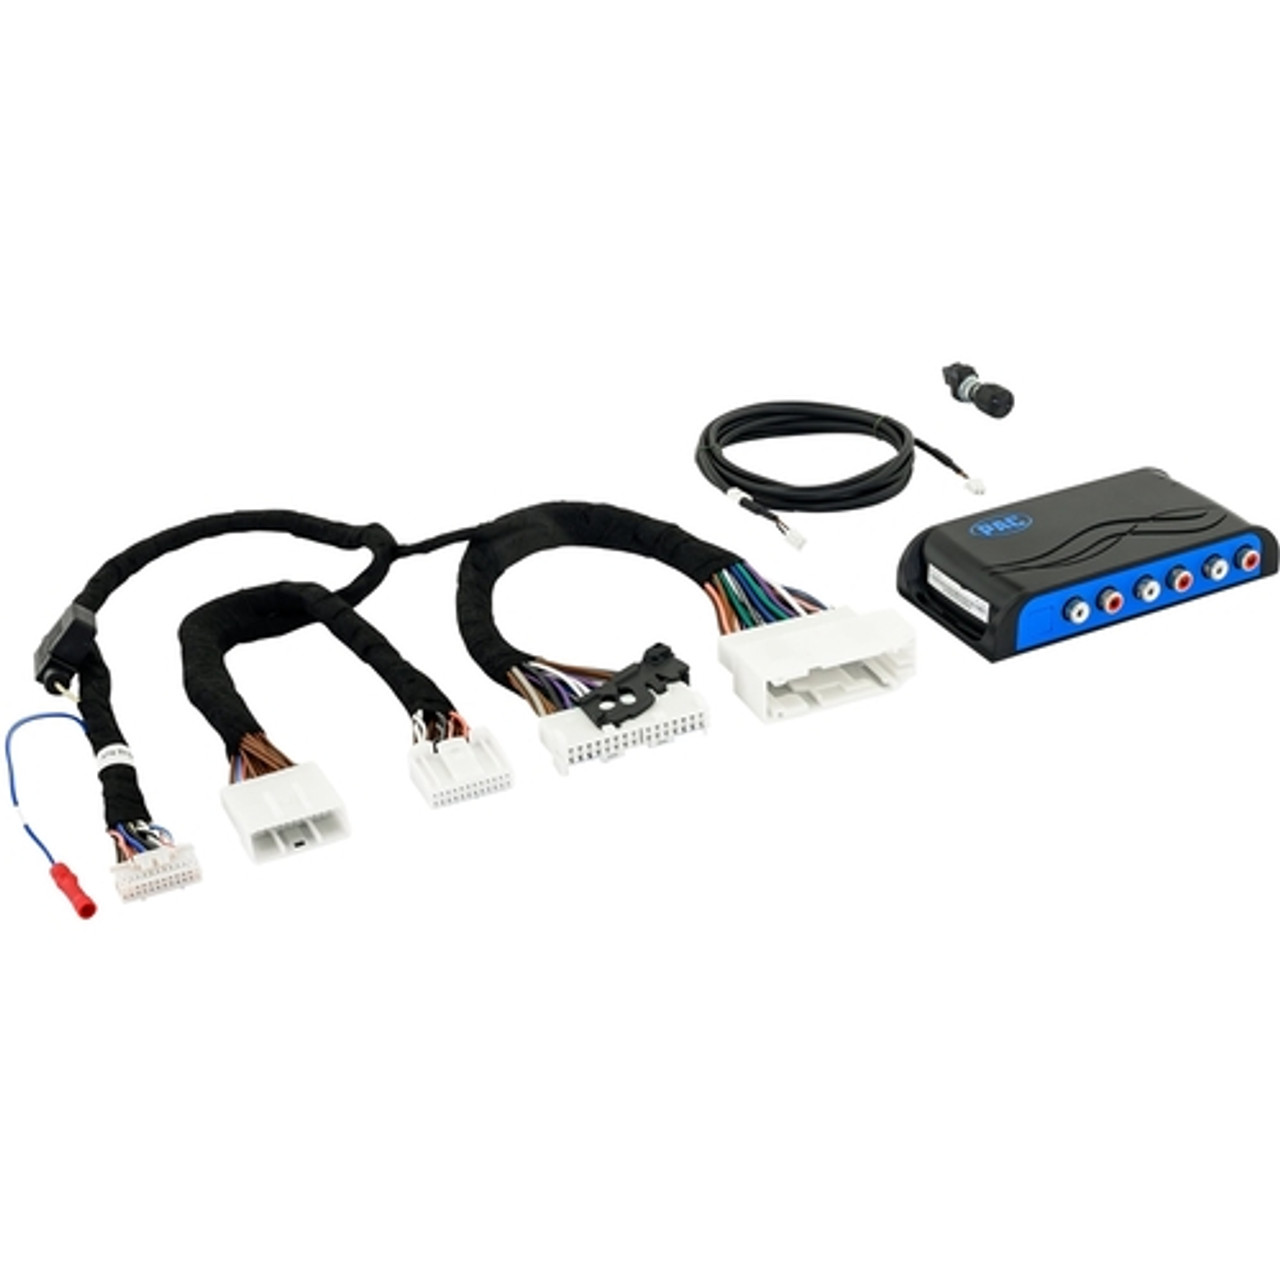 PAC - Audio Interface Adapter for Select Toyota and Lexus Vehicles - Blue/Black